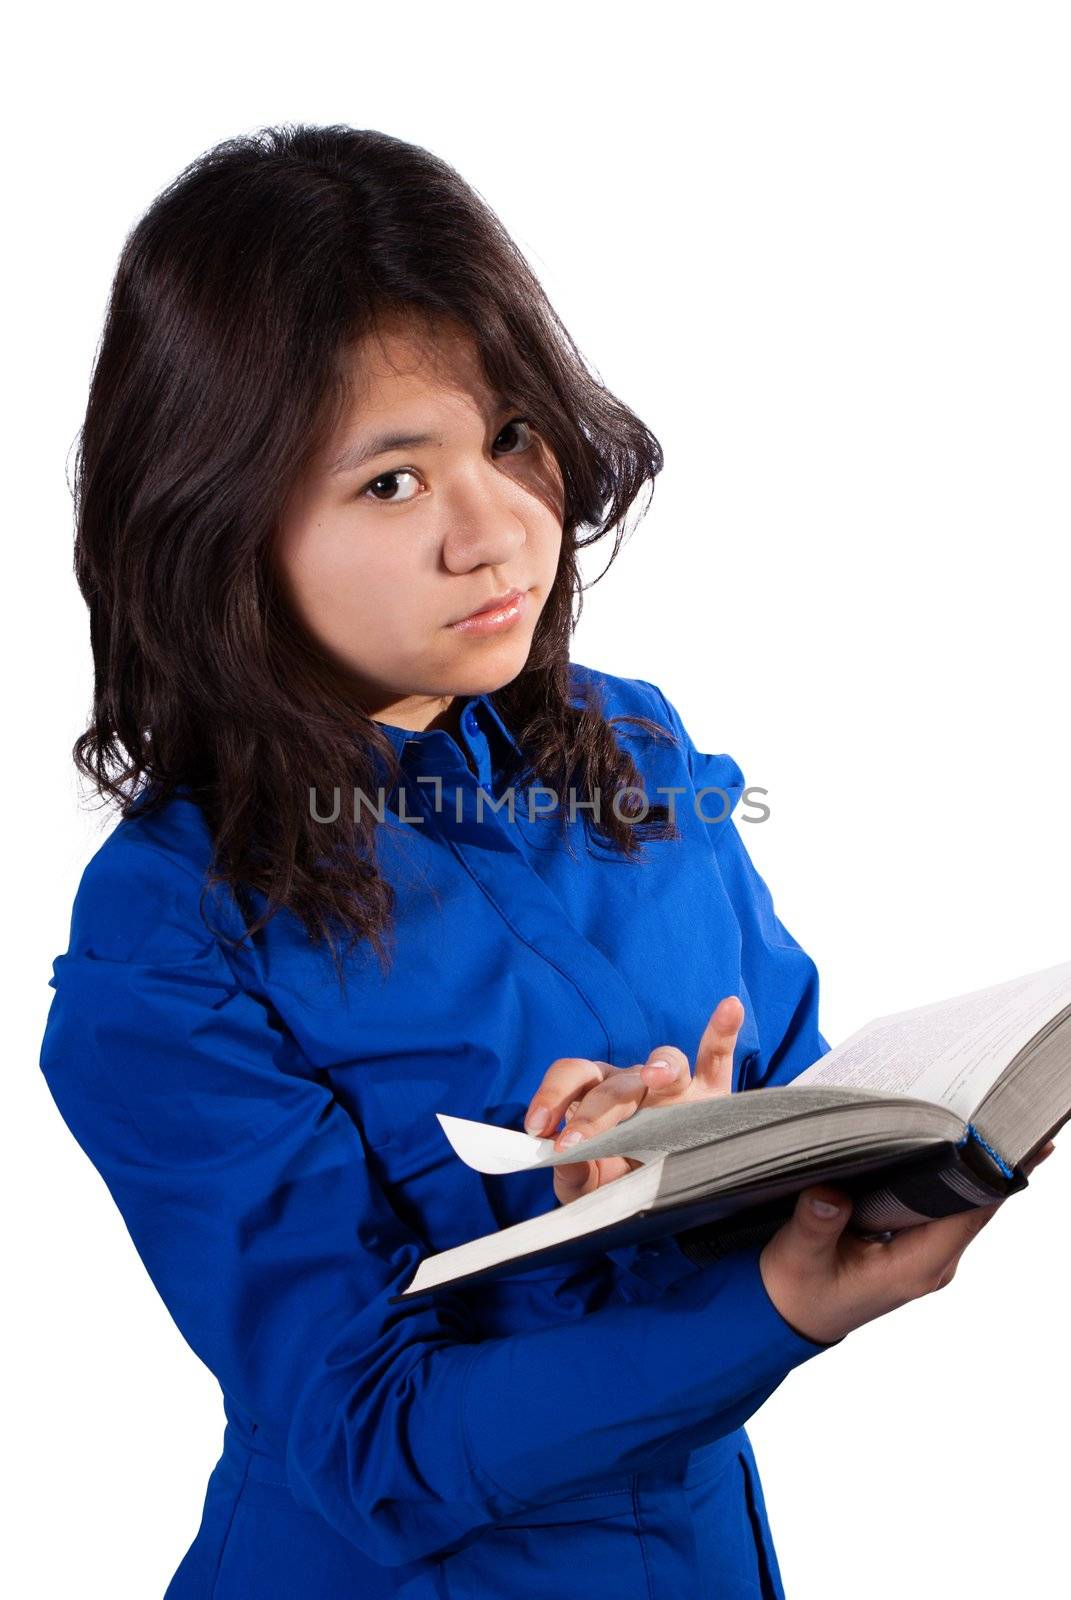 A cute girl reading a book isolated on white